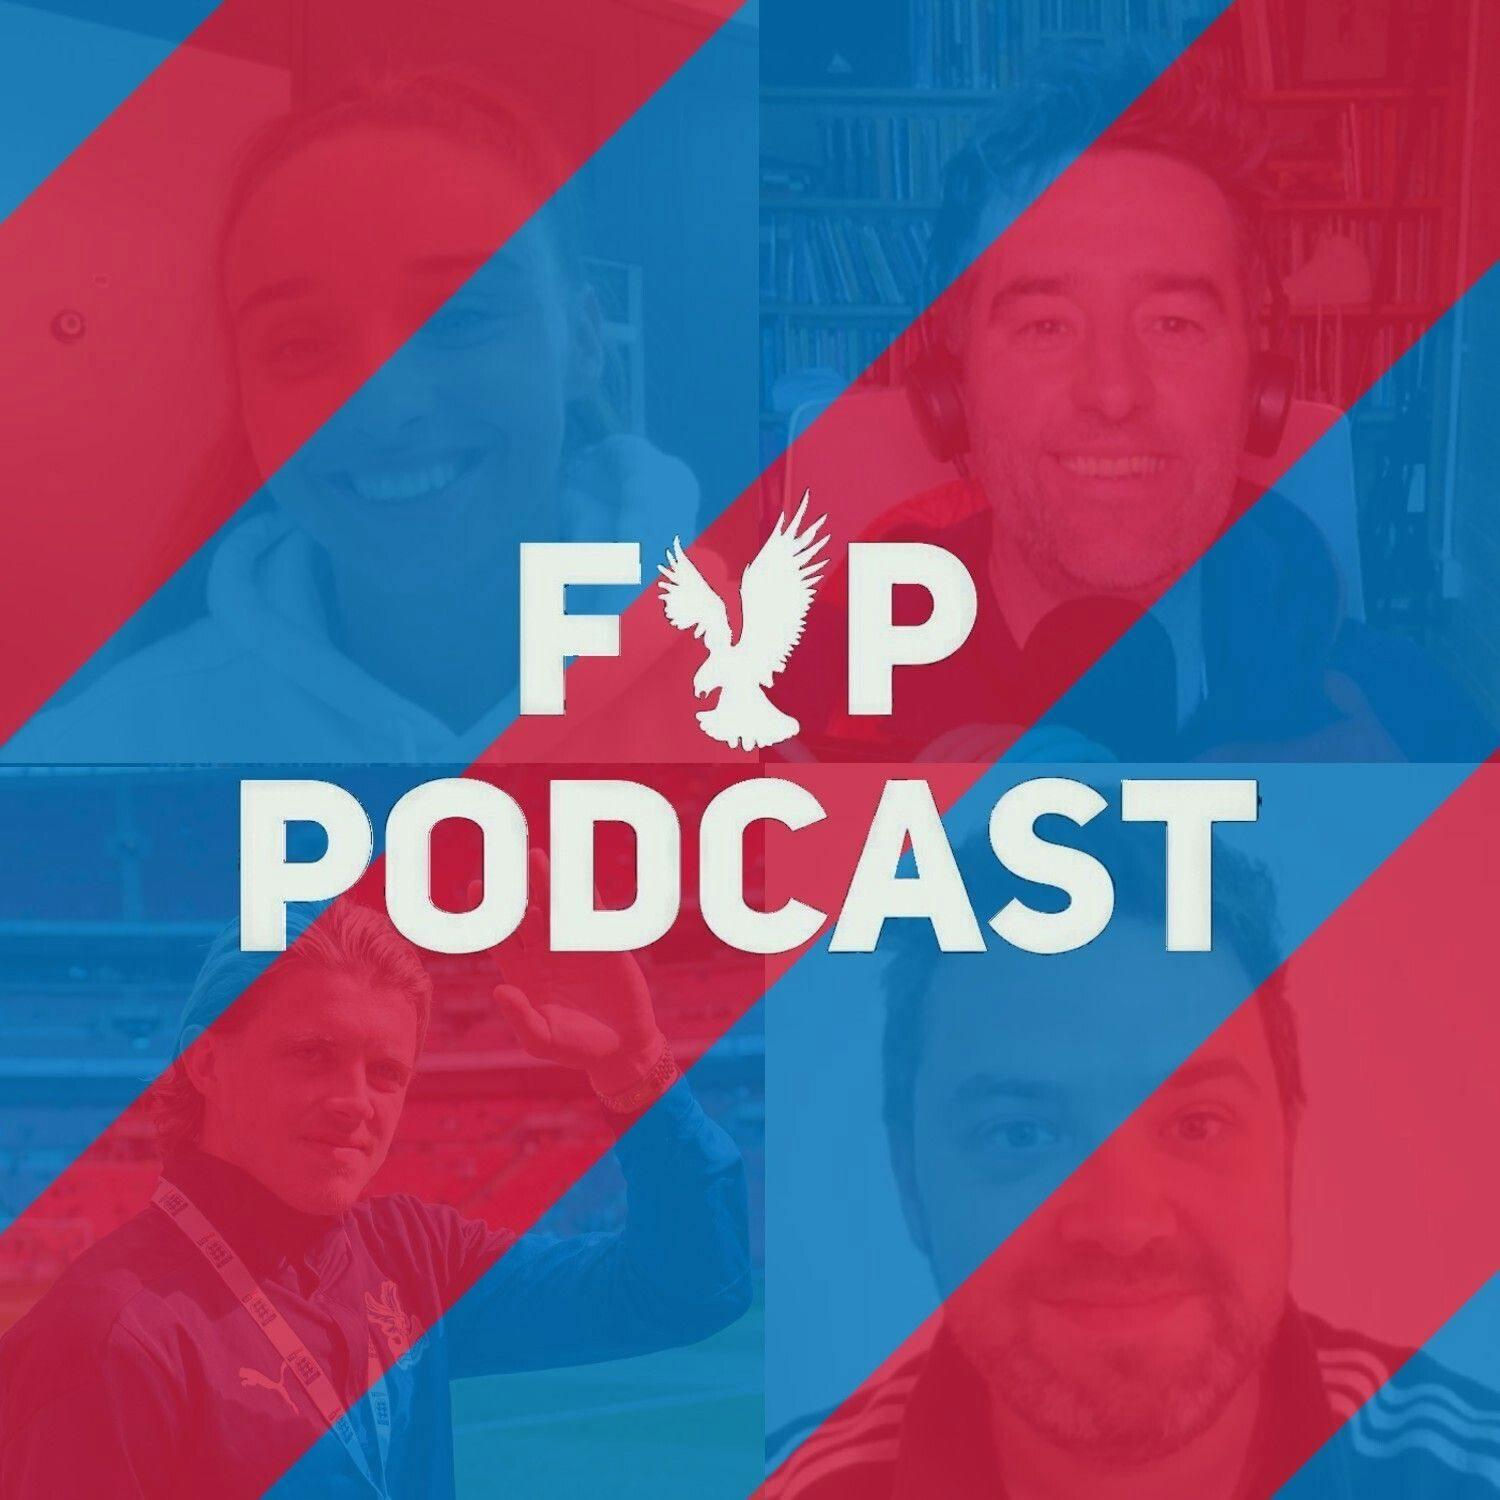 FYP Podcast 424 | South London Takeover